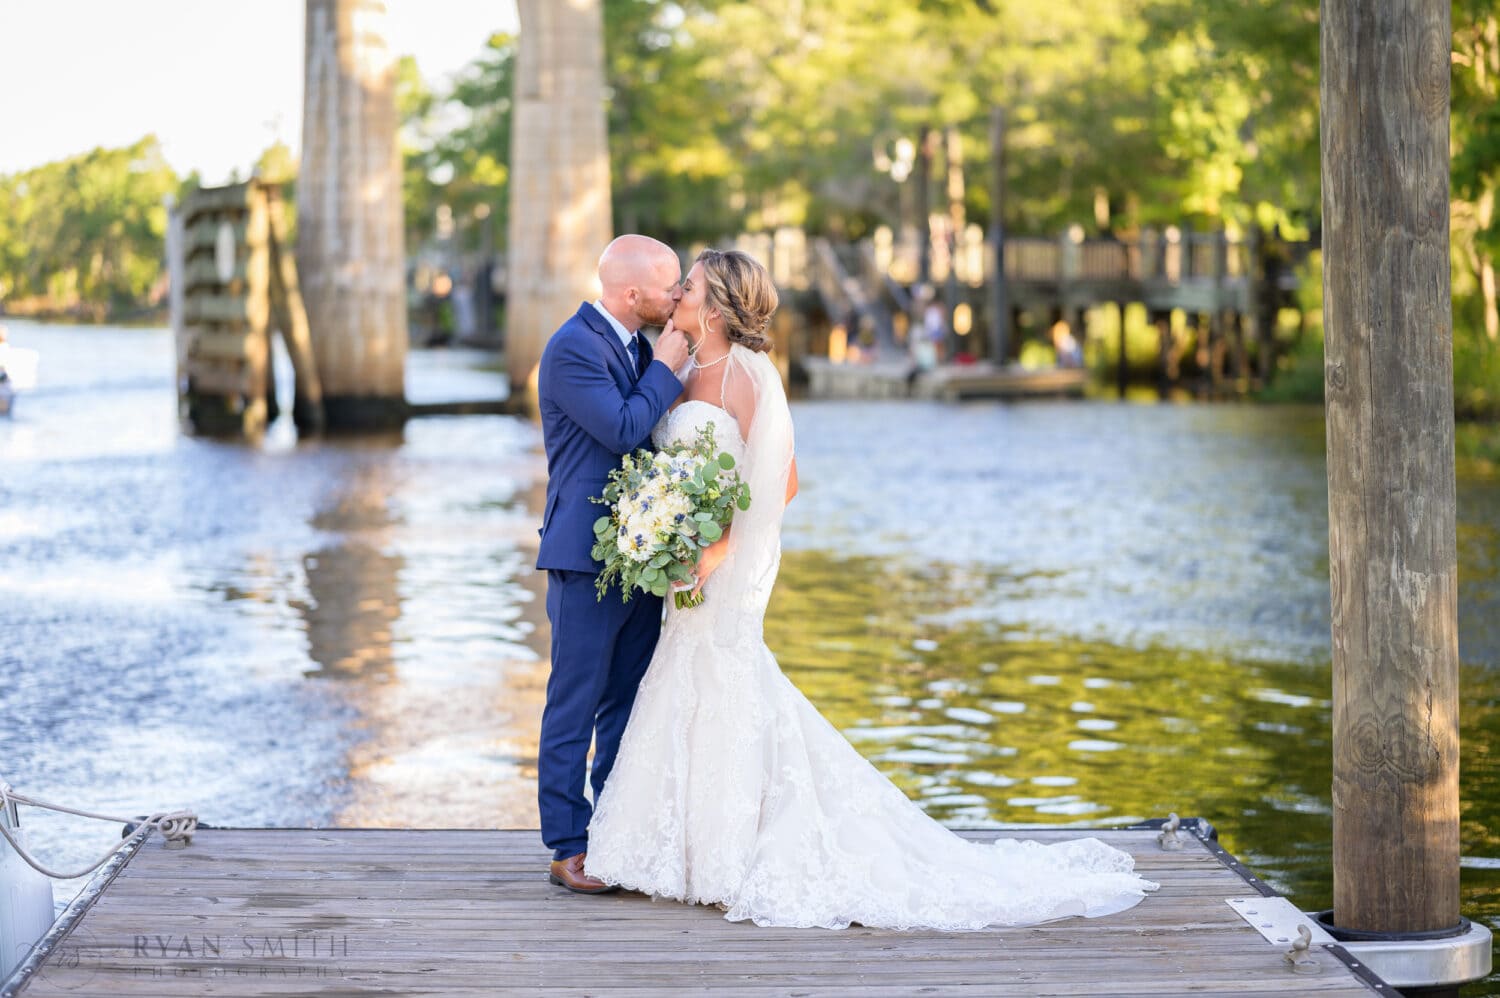 Portraits of the bride and groom on the dock by the river - The Conway Riverwalk